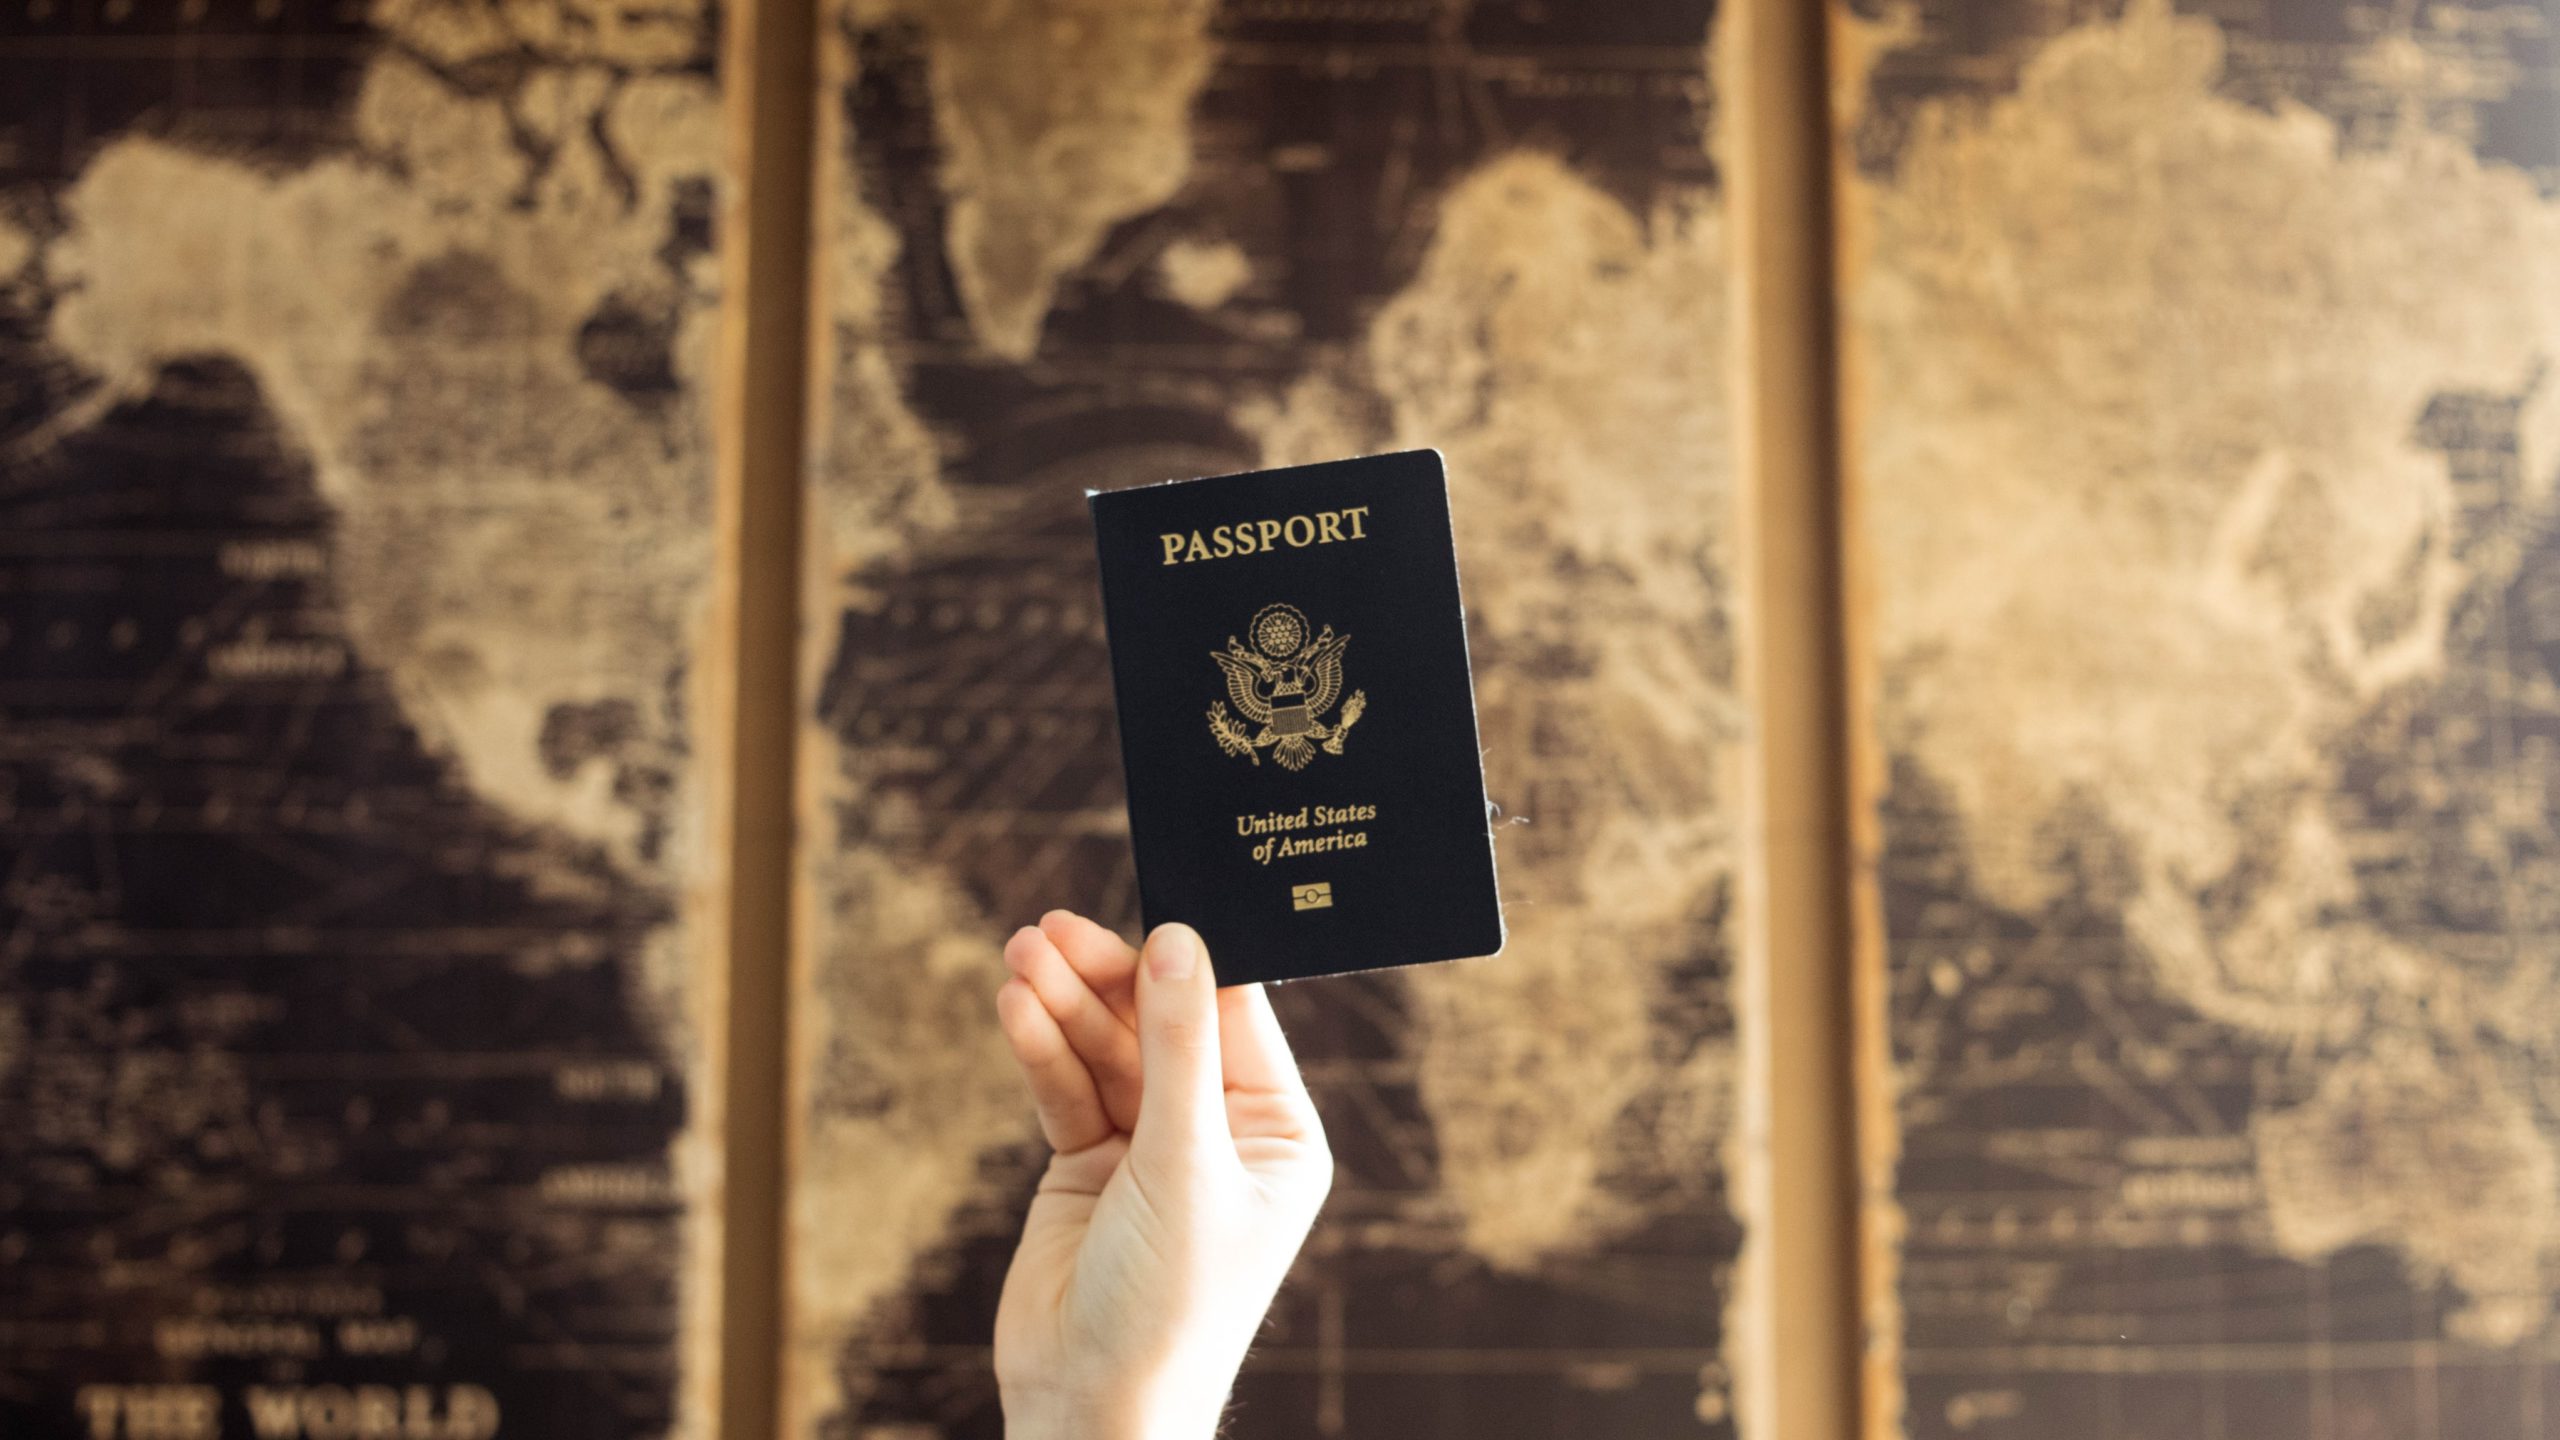 LAWFUL PERMANENT RESIDENCE (I.E. GREEN CARD HOLDER) TO U.S. CITIZENSHIP